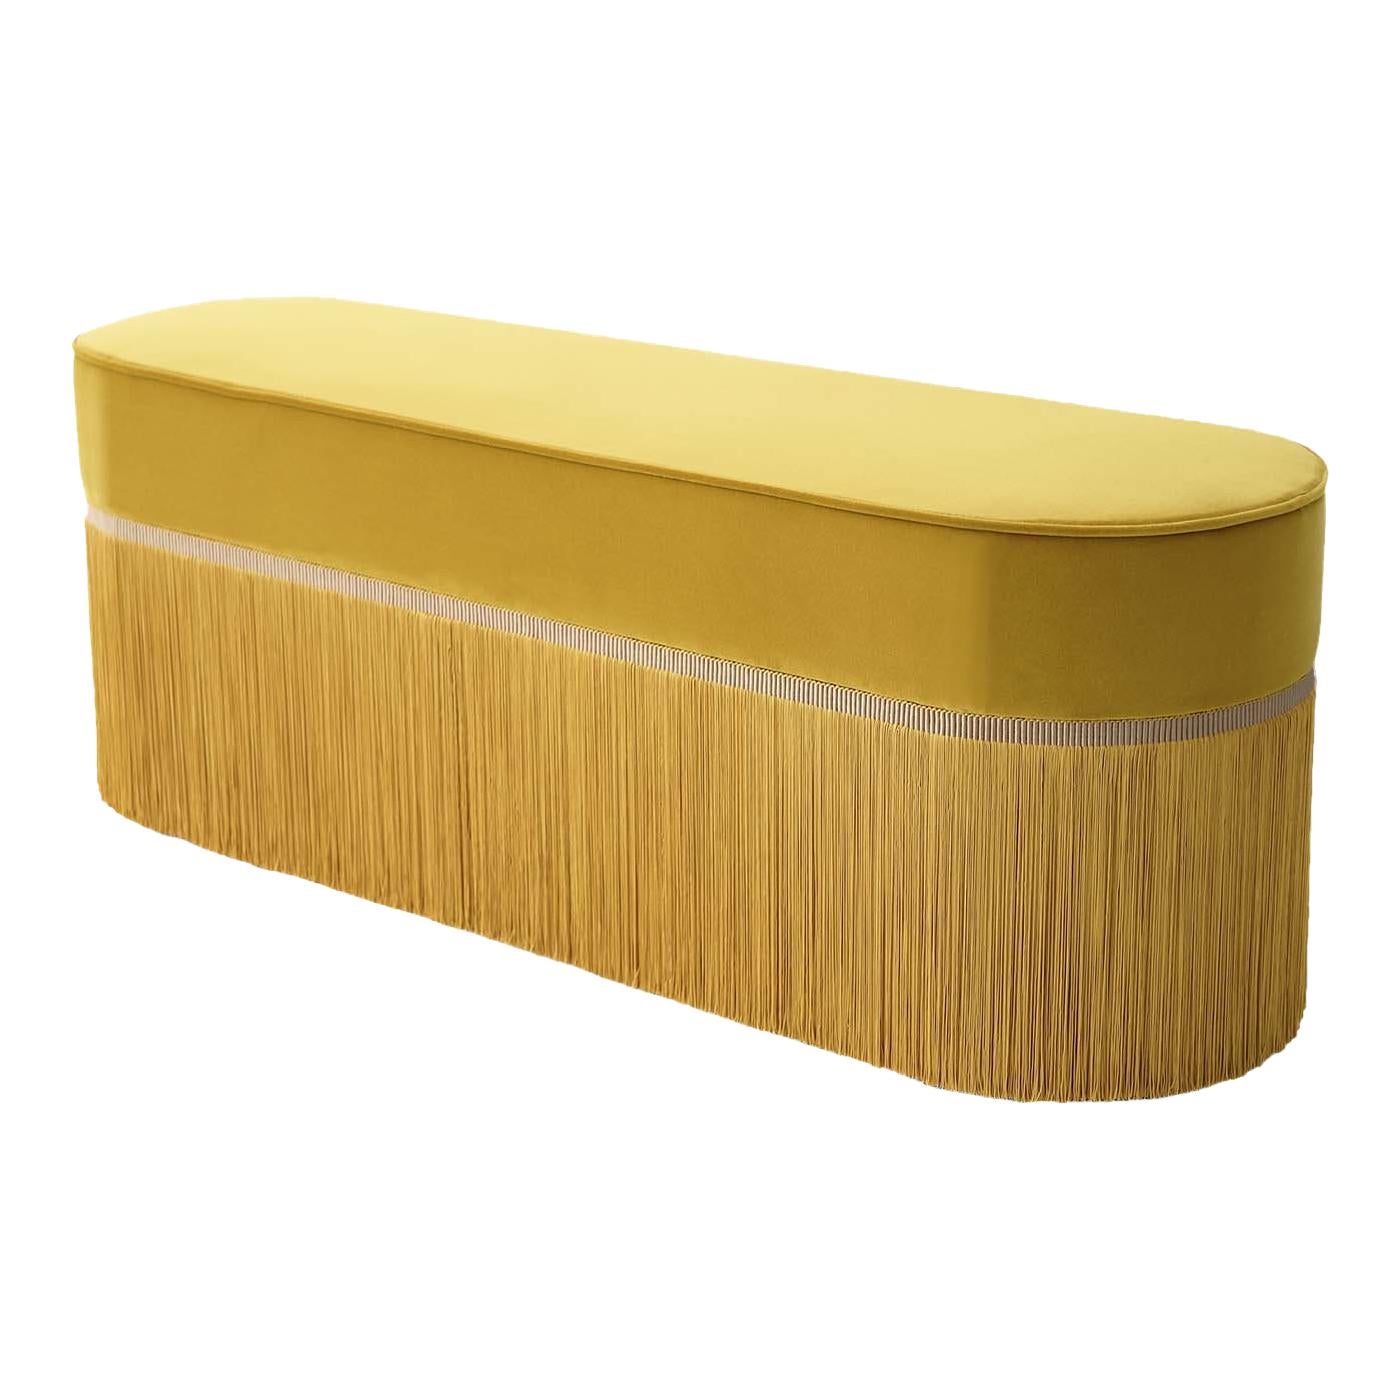 Couture Yellow Bench by Lorenza Bozzoli Design For Sale